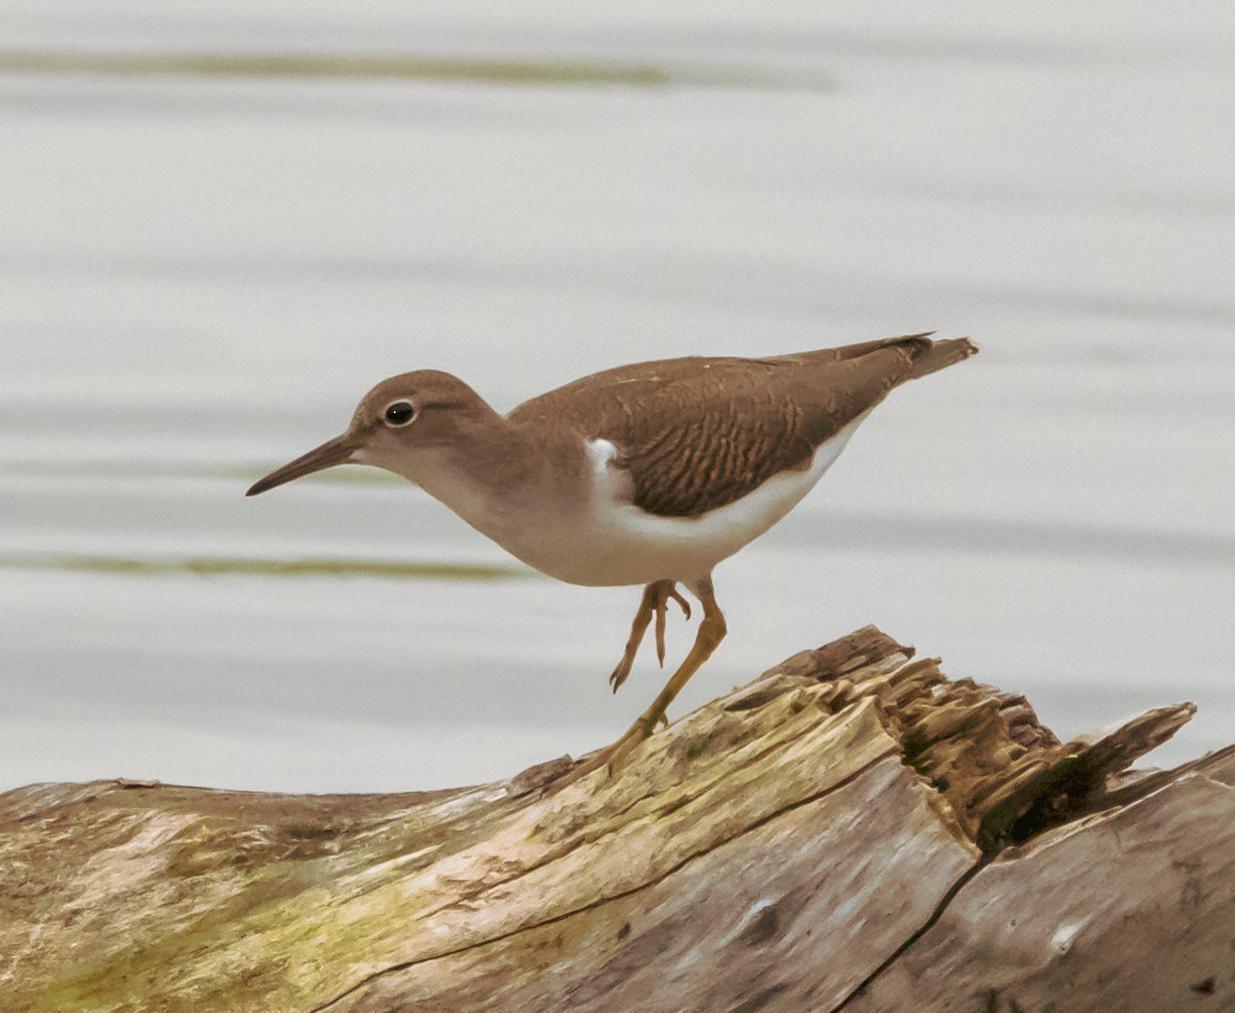 Spotted Sandpiper Photo by Tom Gannon